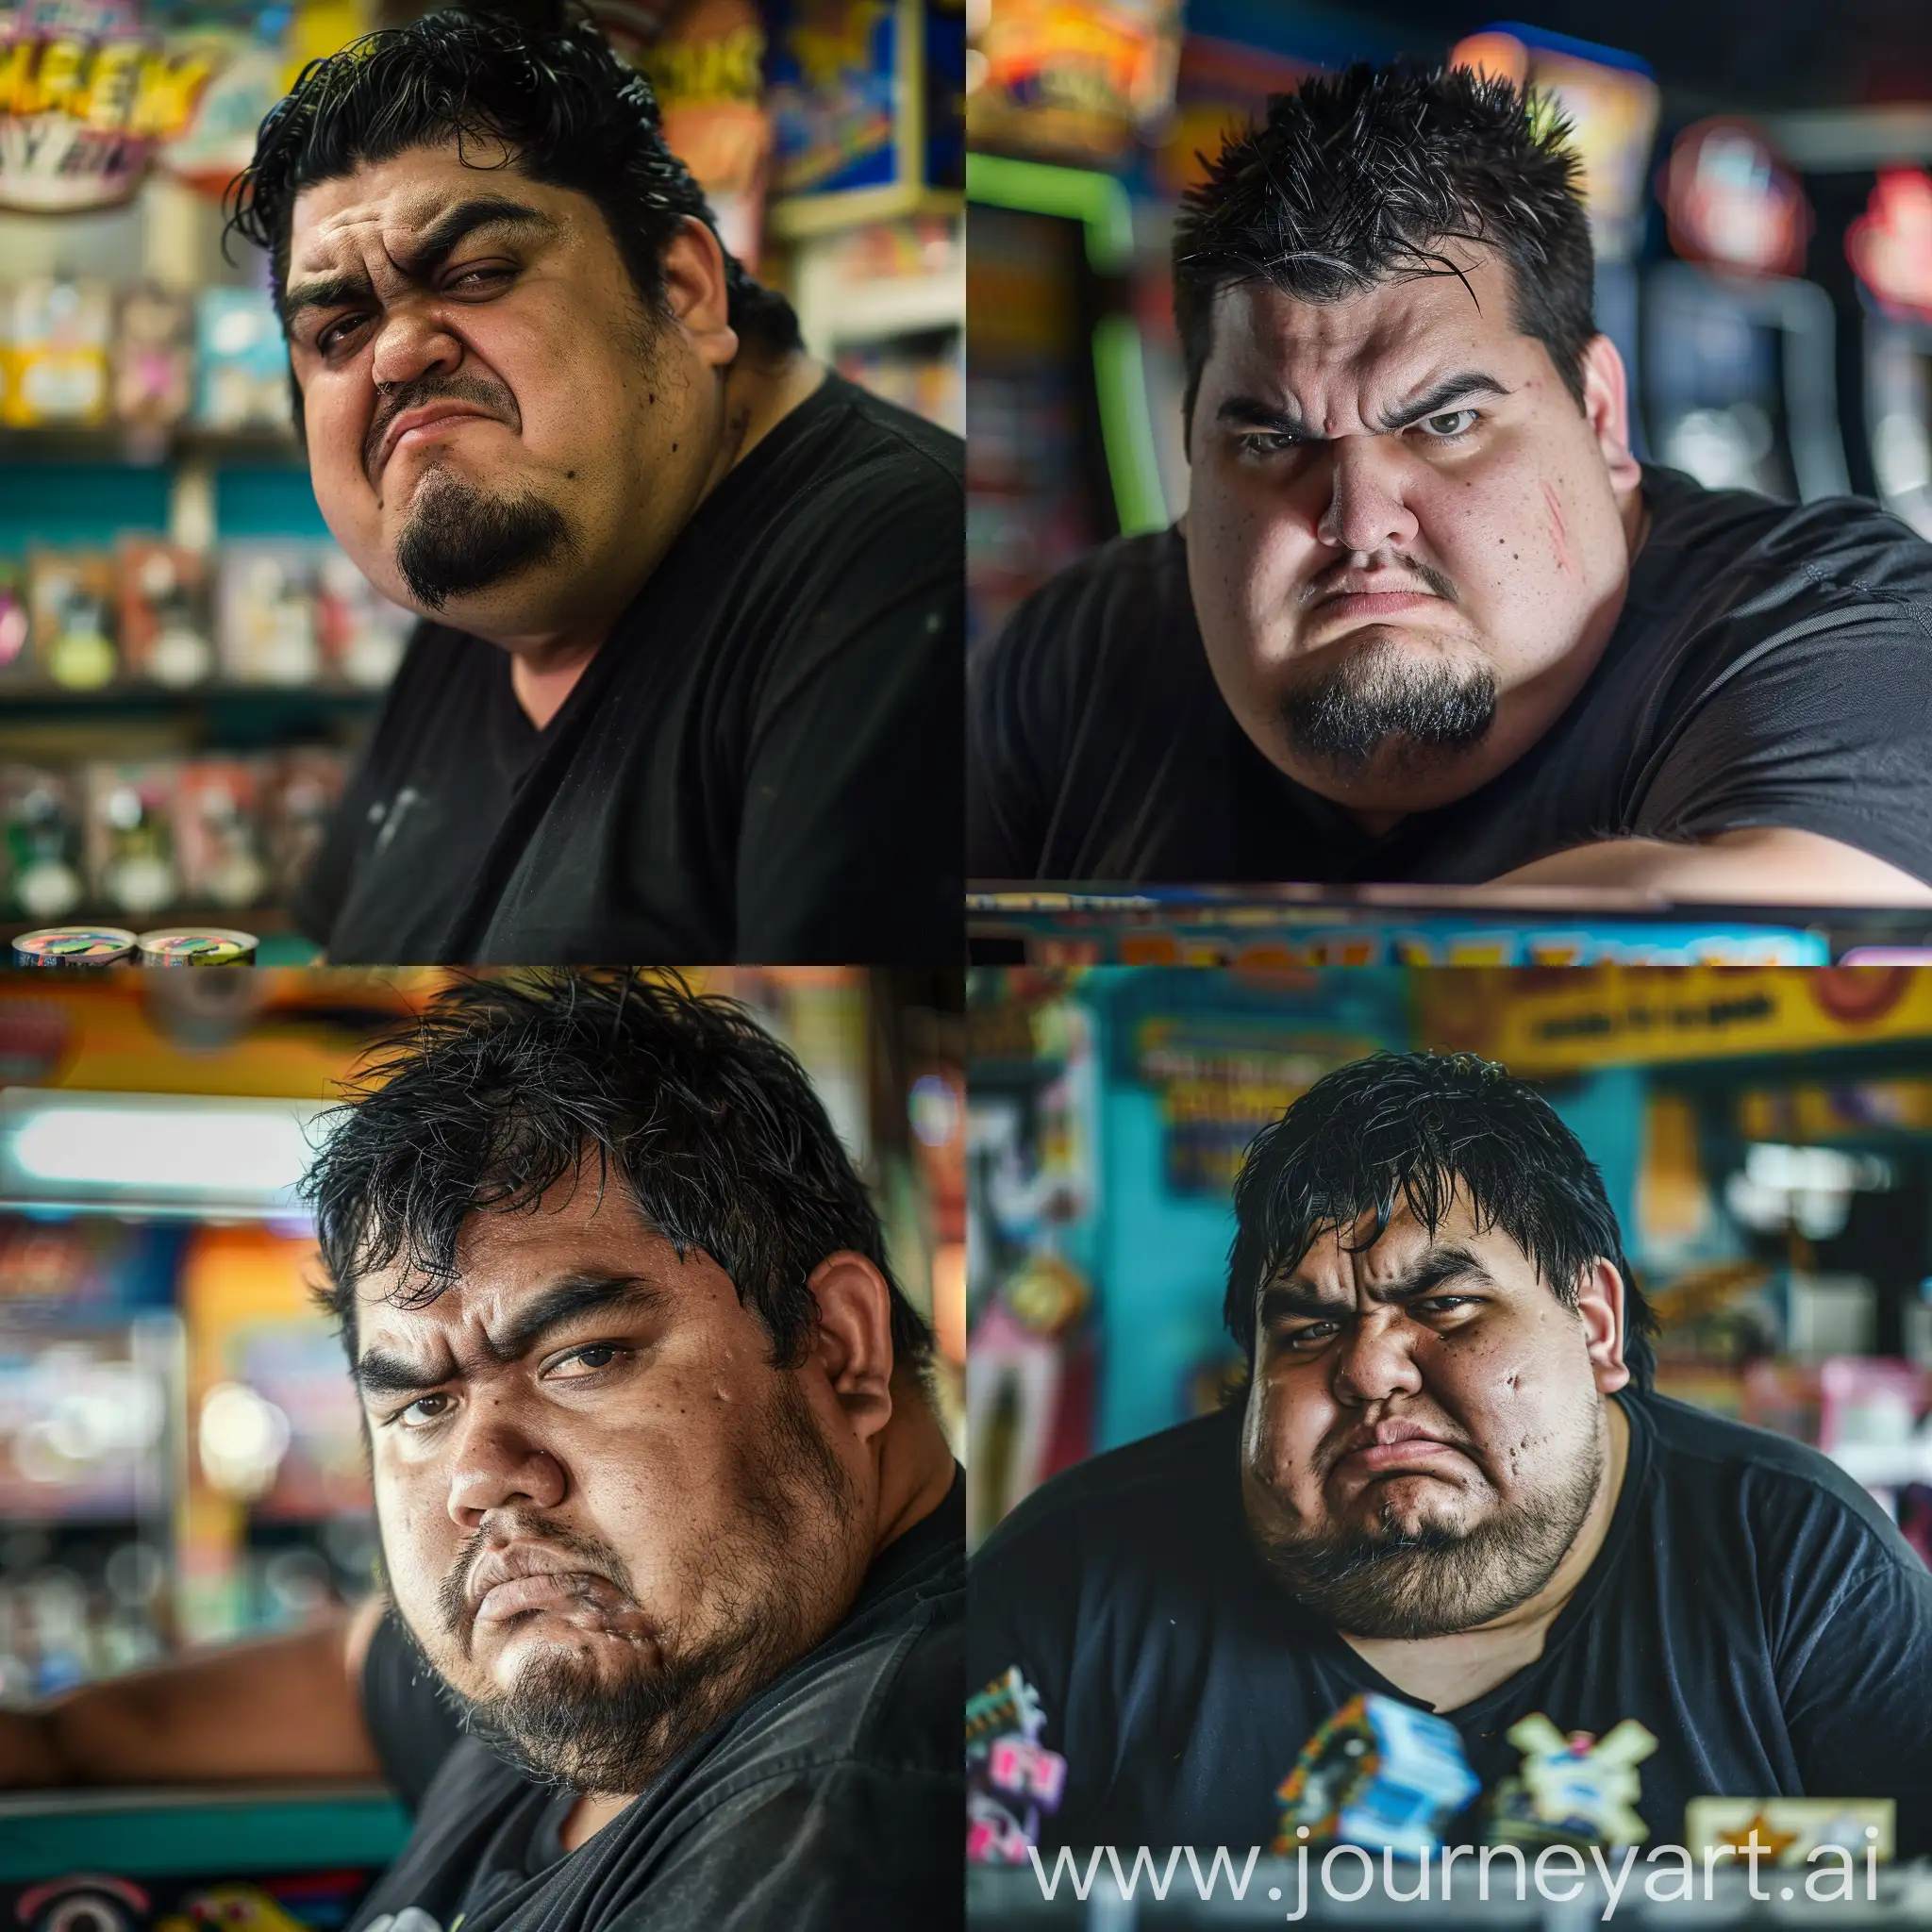 Intense-Arcade-Attendant-with-Squinting-Stare